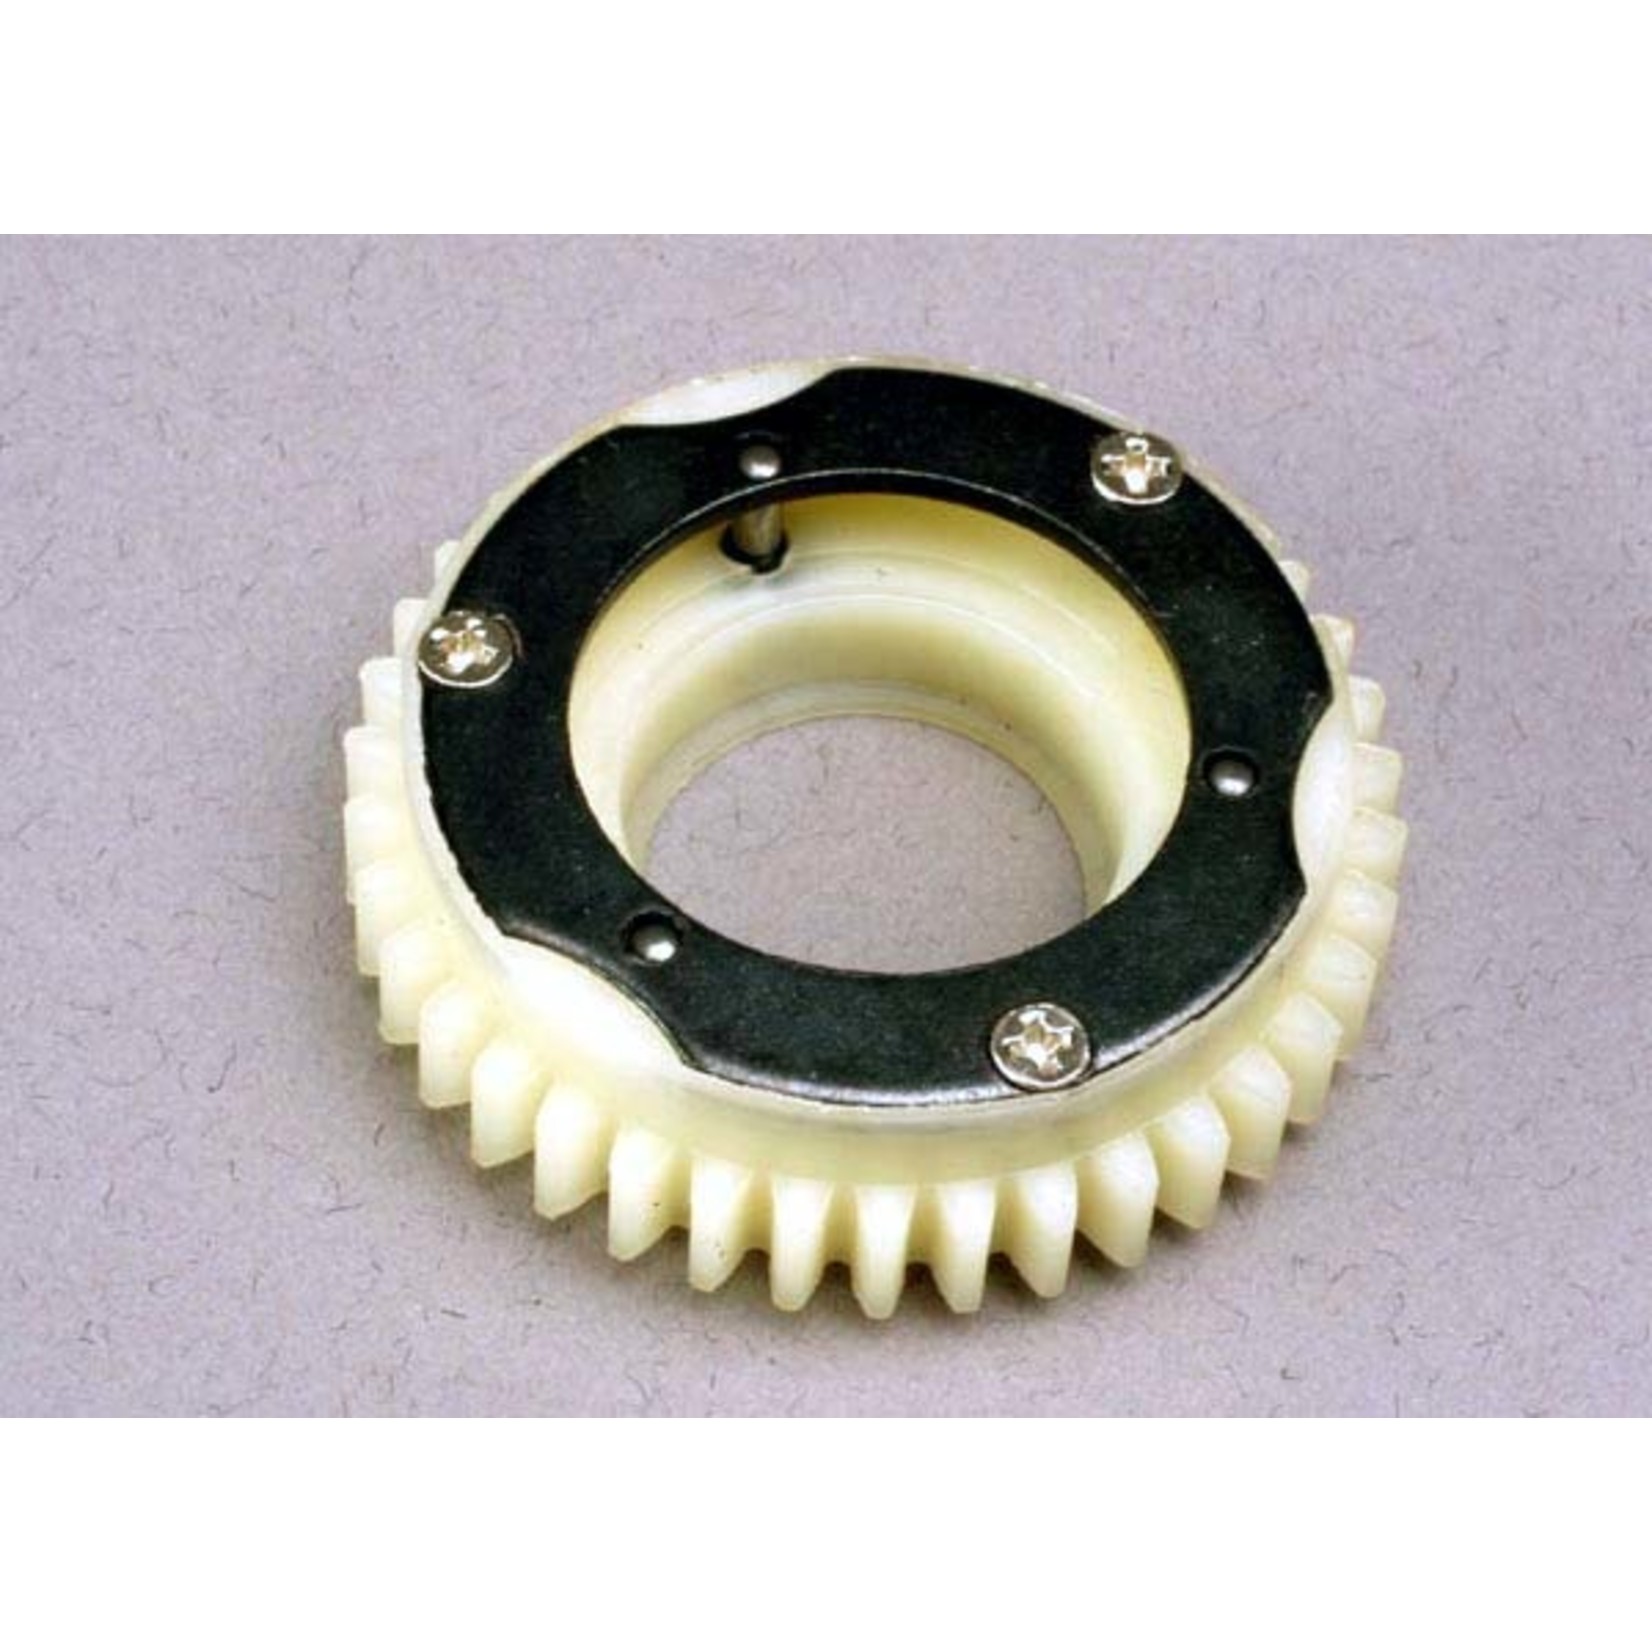 Traxxas 4985 - Spur gear aeeembly, 38-T (2nd speed)